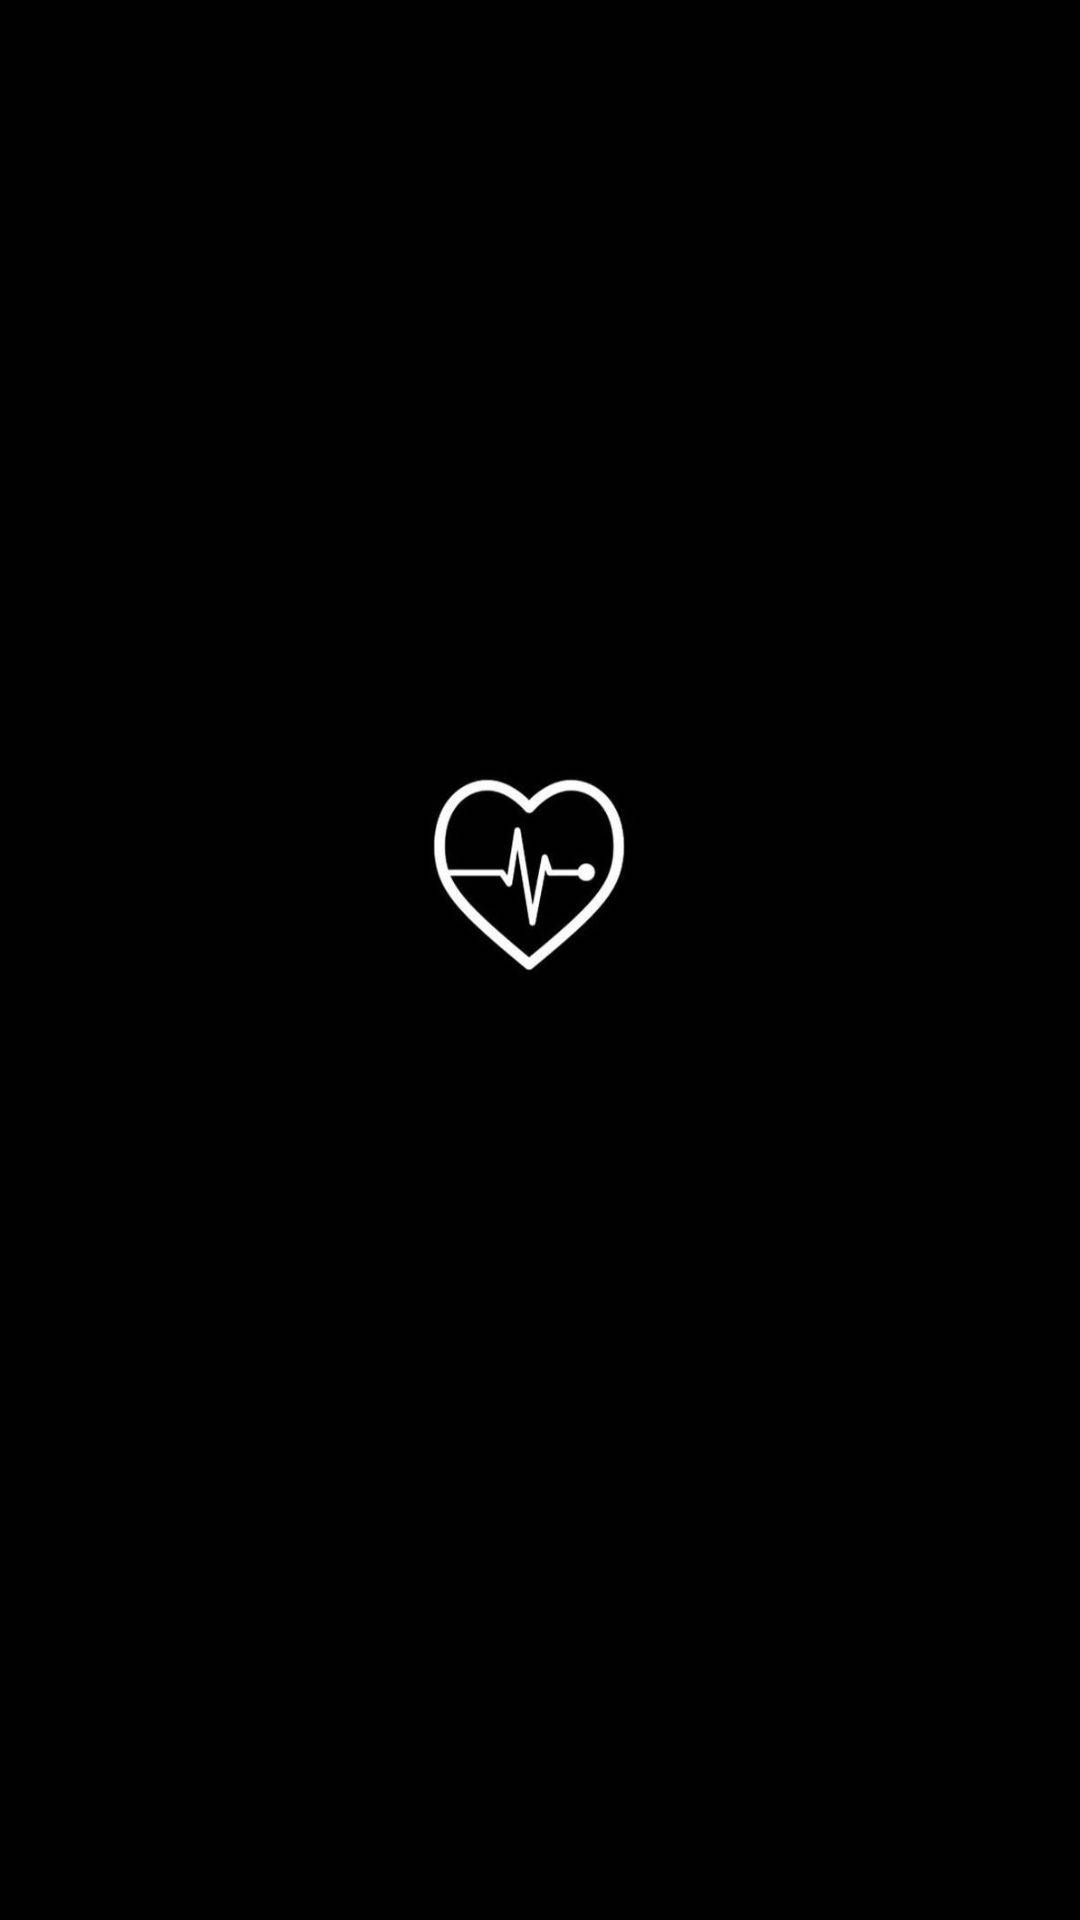 1080X1920 Black Heart Wallpaper and Background